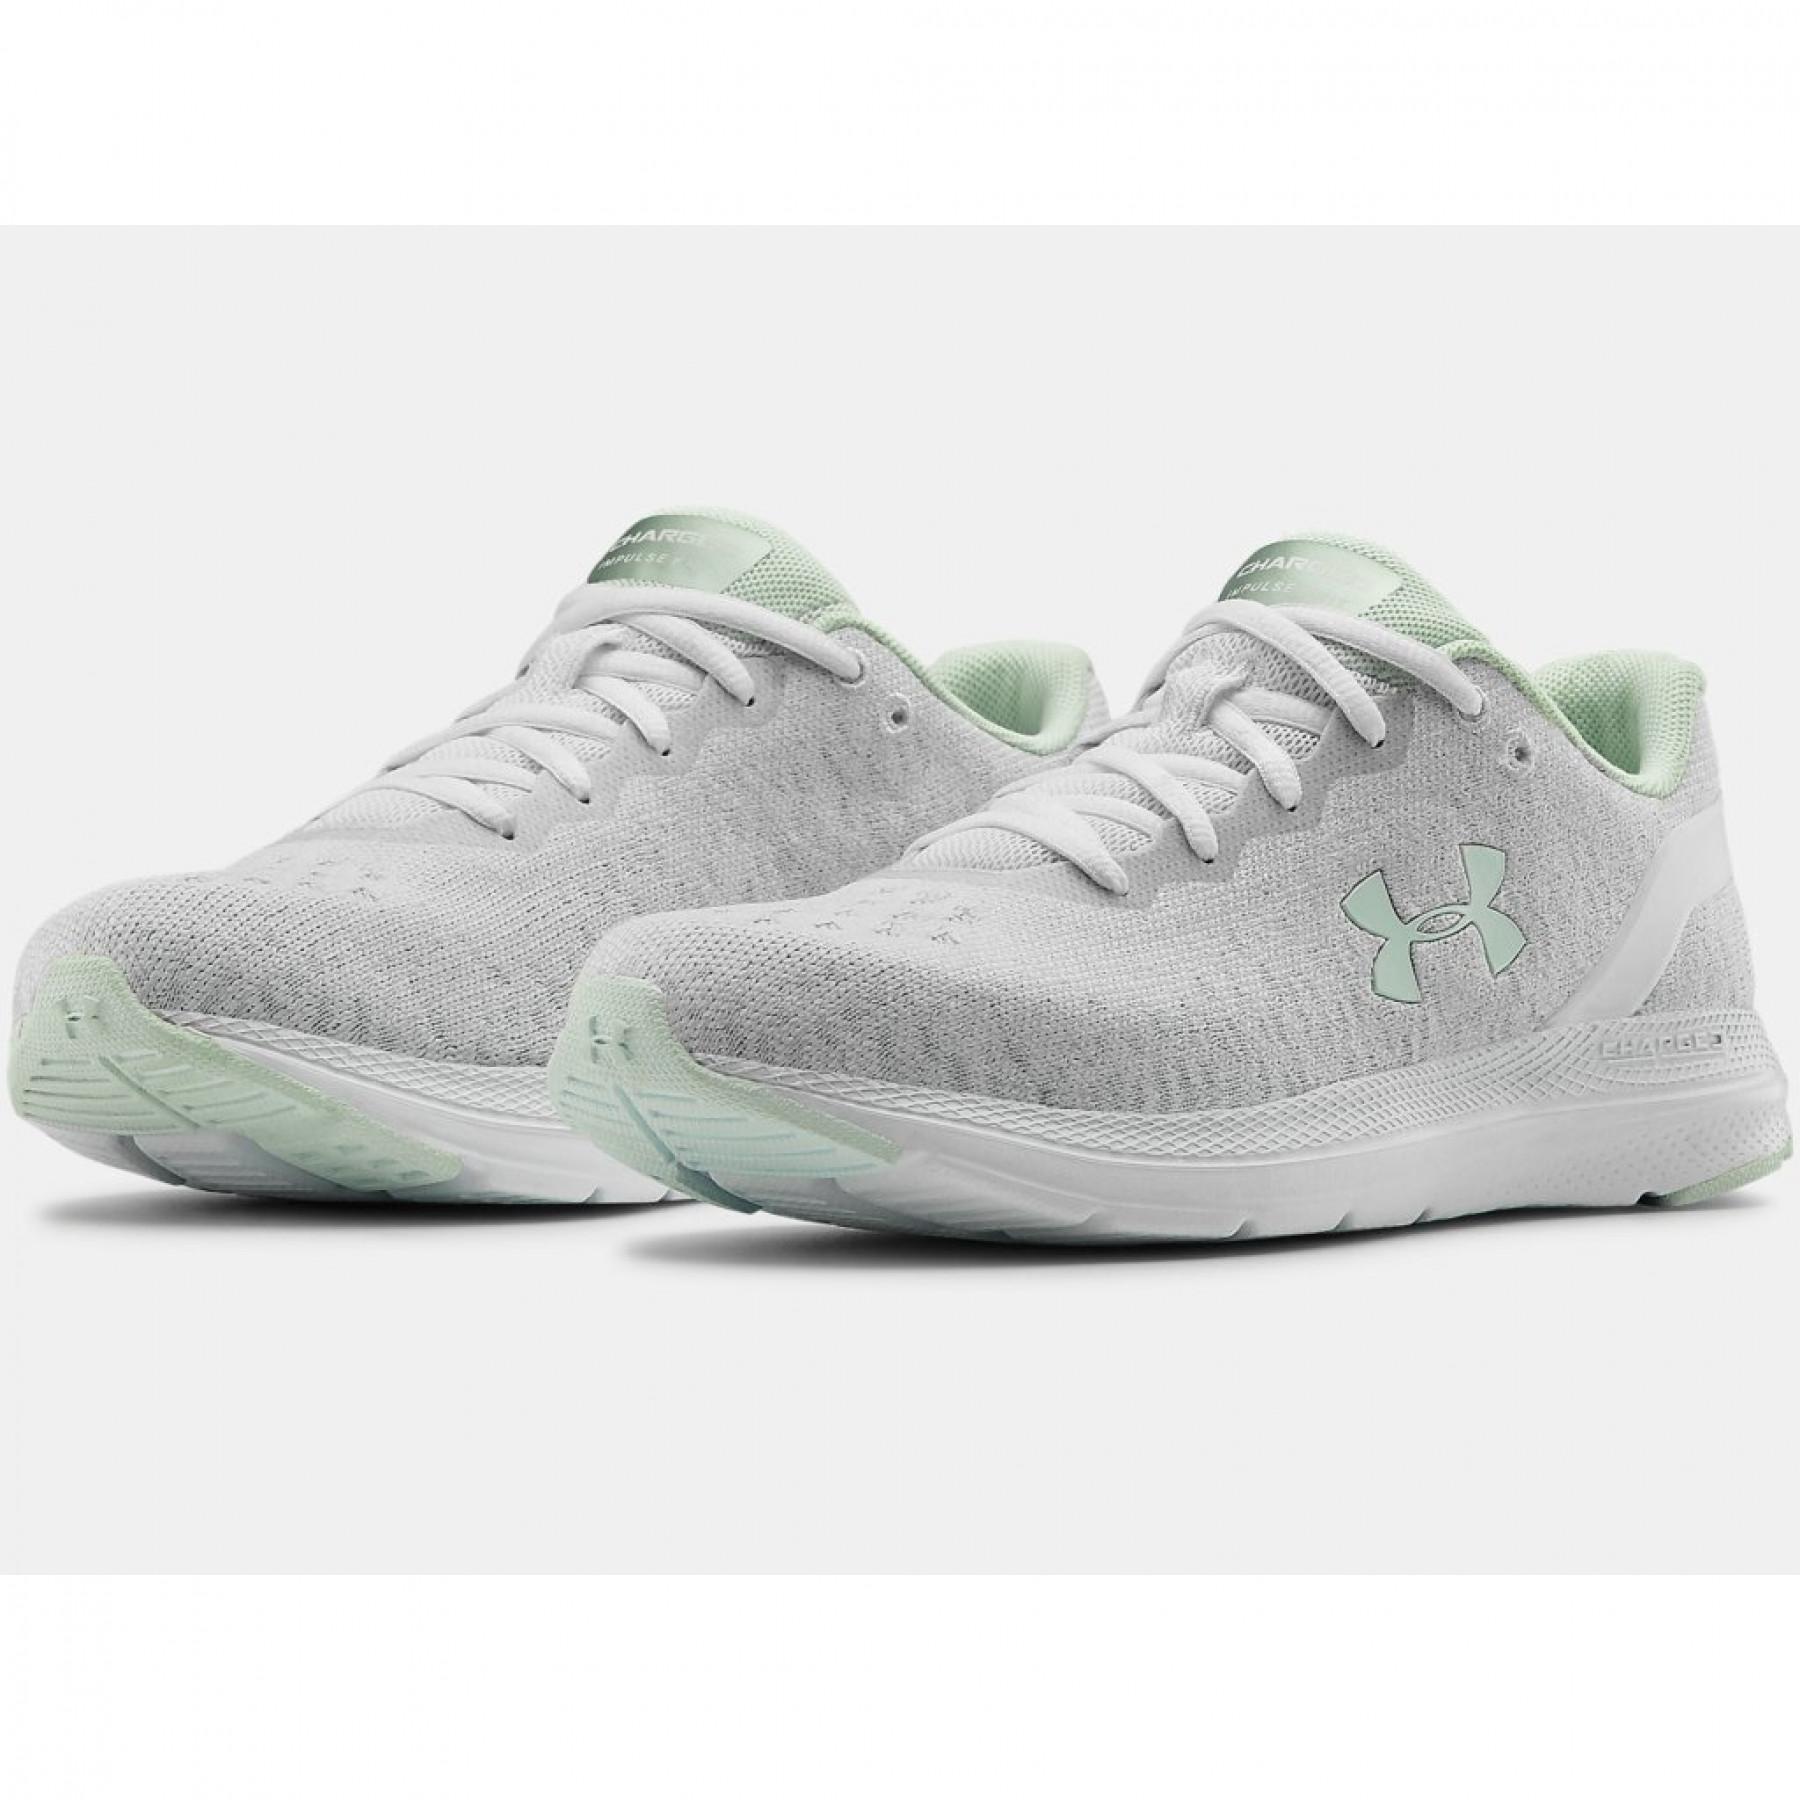 Zapatos de mujer Under Armour Charged Impulse Knit